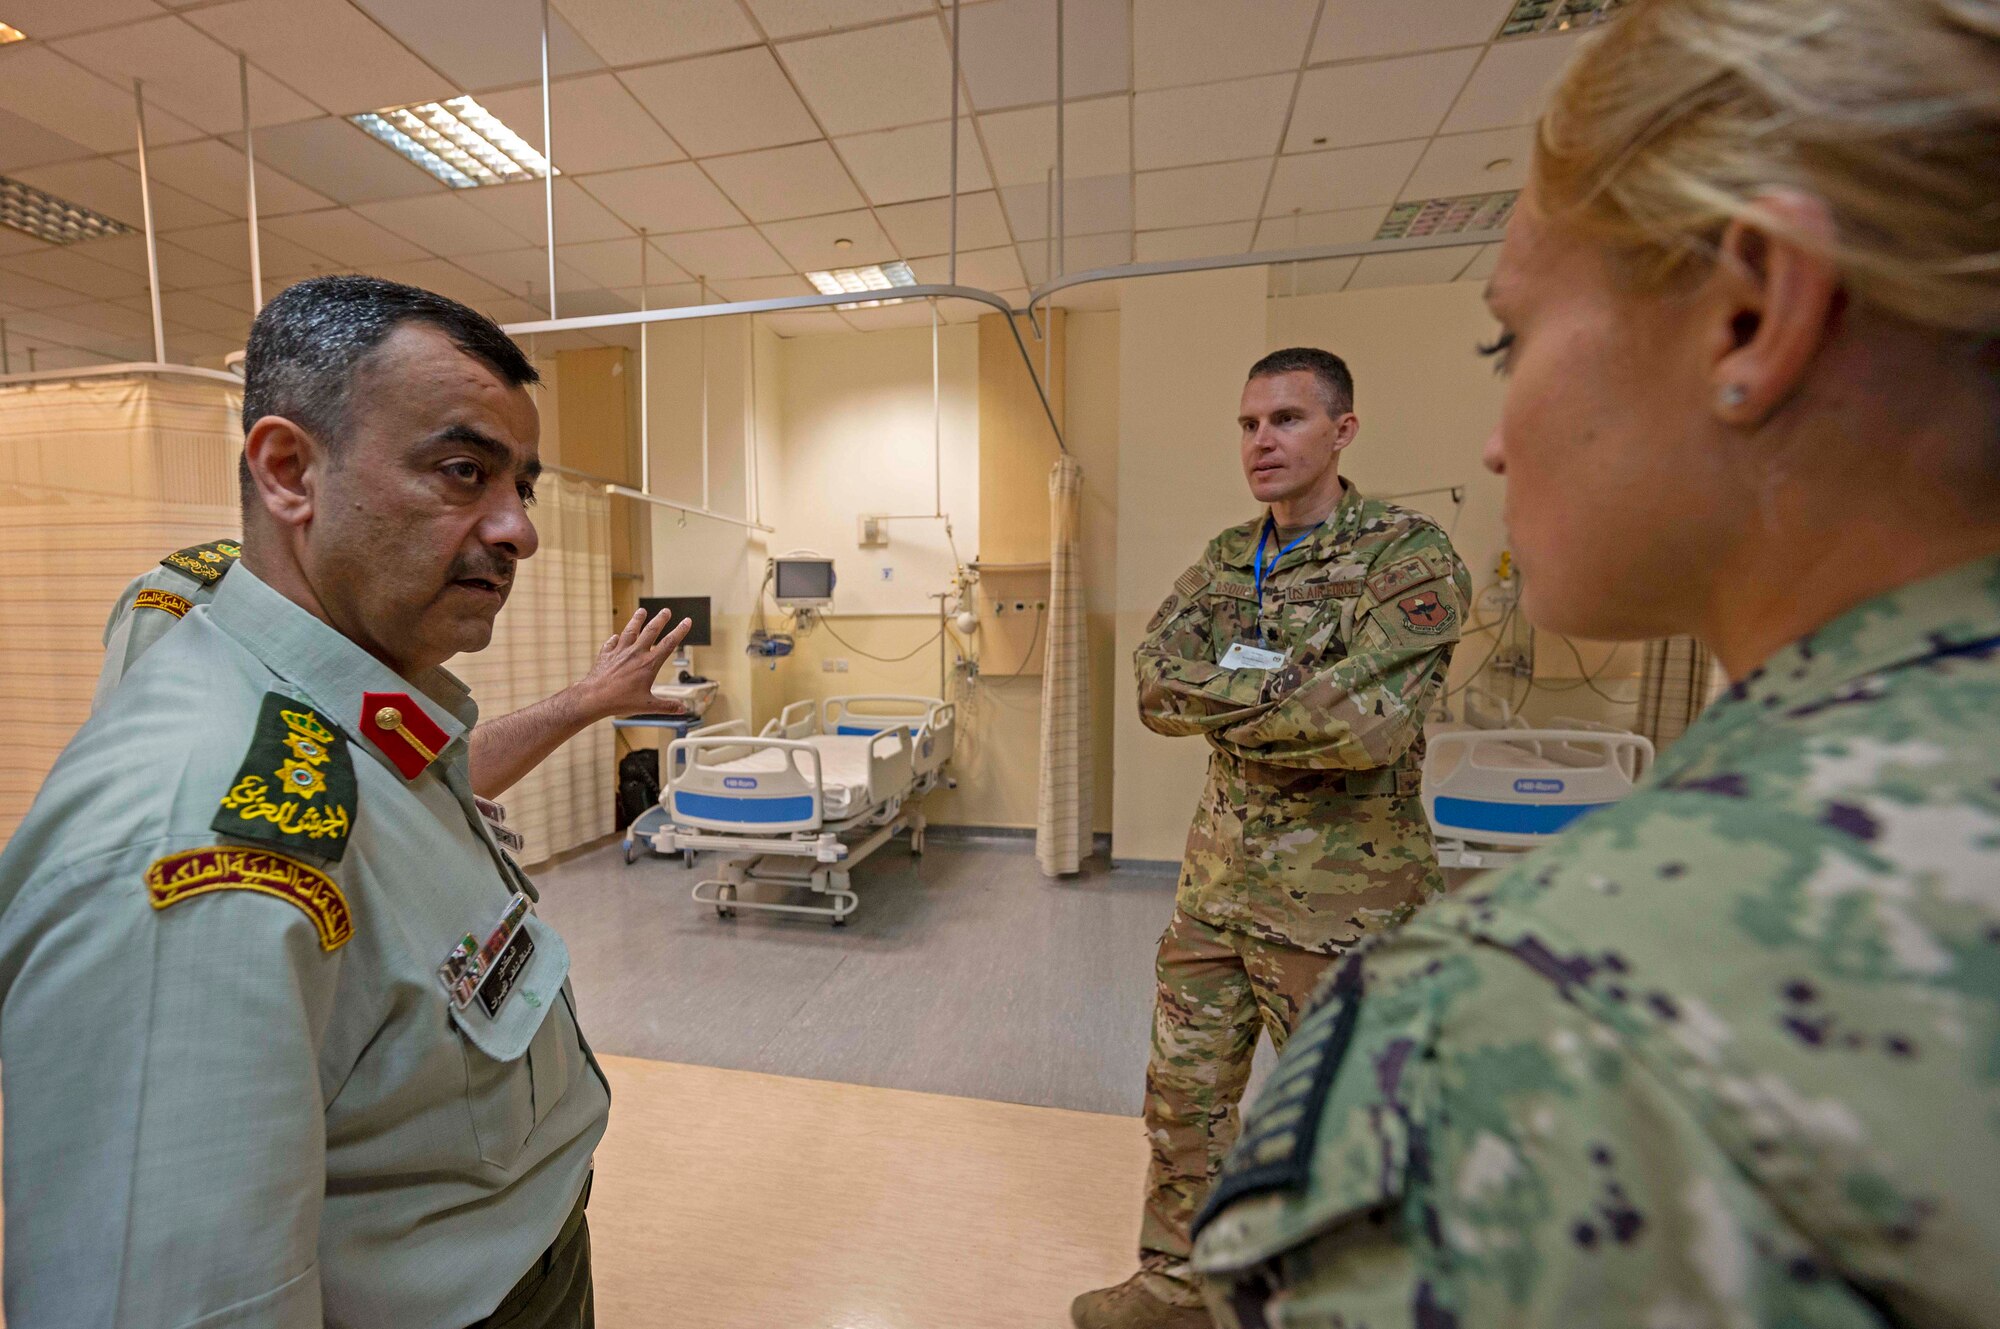 Dr. Abdula Mheerat, Jordanian Royal Medical Service Chief of emergency department, Jordanian Royal Medical Service, discusses post-surgery procedures and capabilities with Lt. Cmdr. Taylor DesRosiers, Walter Reed Medical Center critical care fellow, and Lt. Col. Erik DeSoucy, Brooke Army Medical Center trauma surgeon and critical care physician inside the King Hussein Medical Center May 8, 2022 in Amman, Jordan.